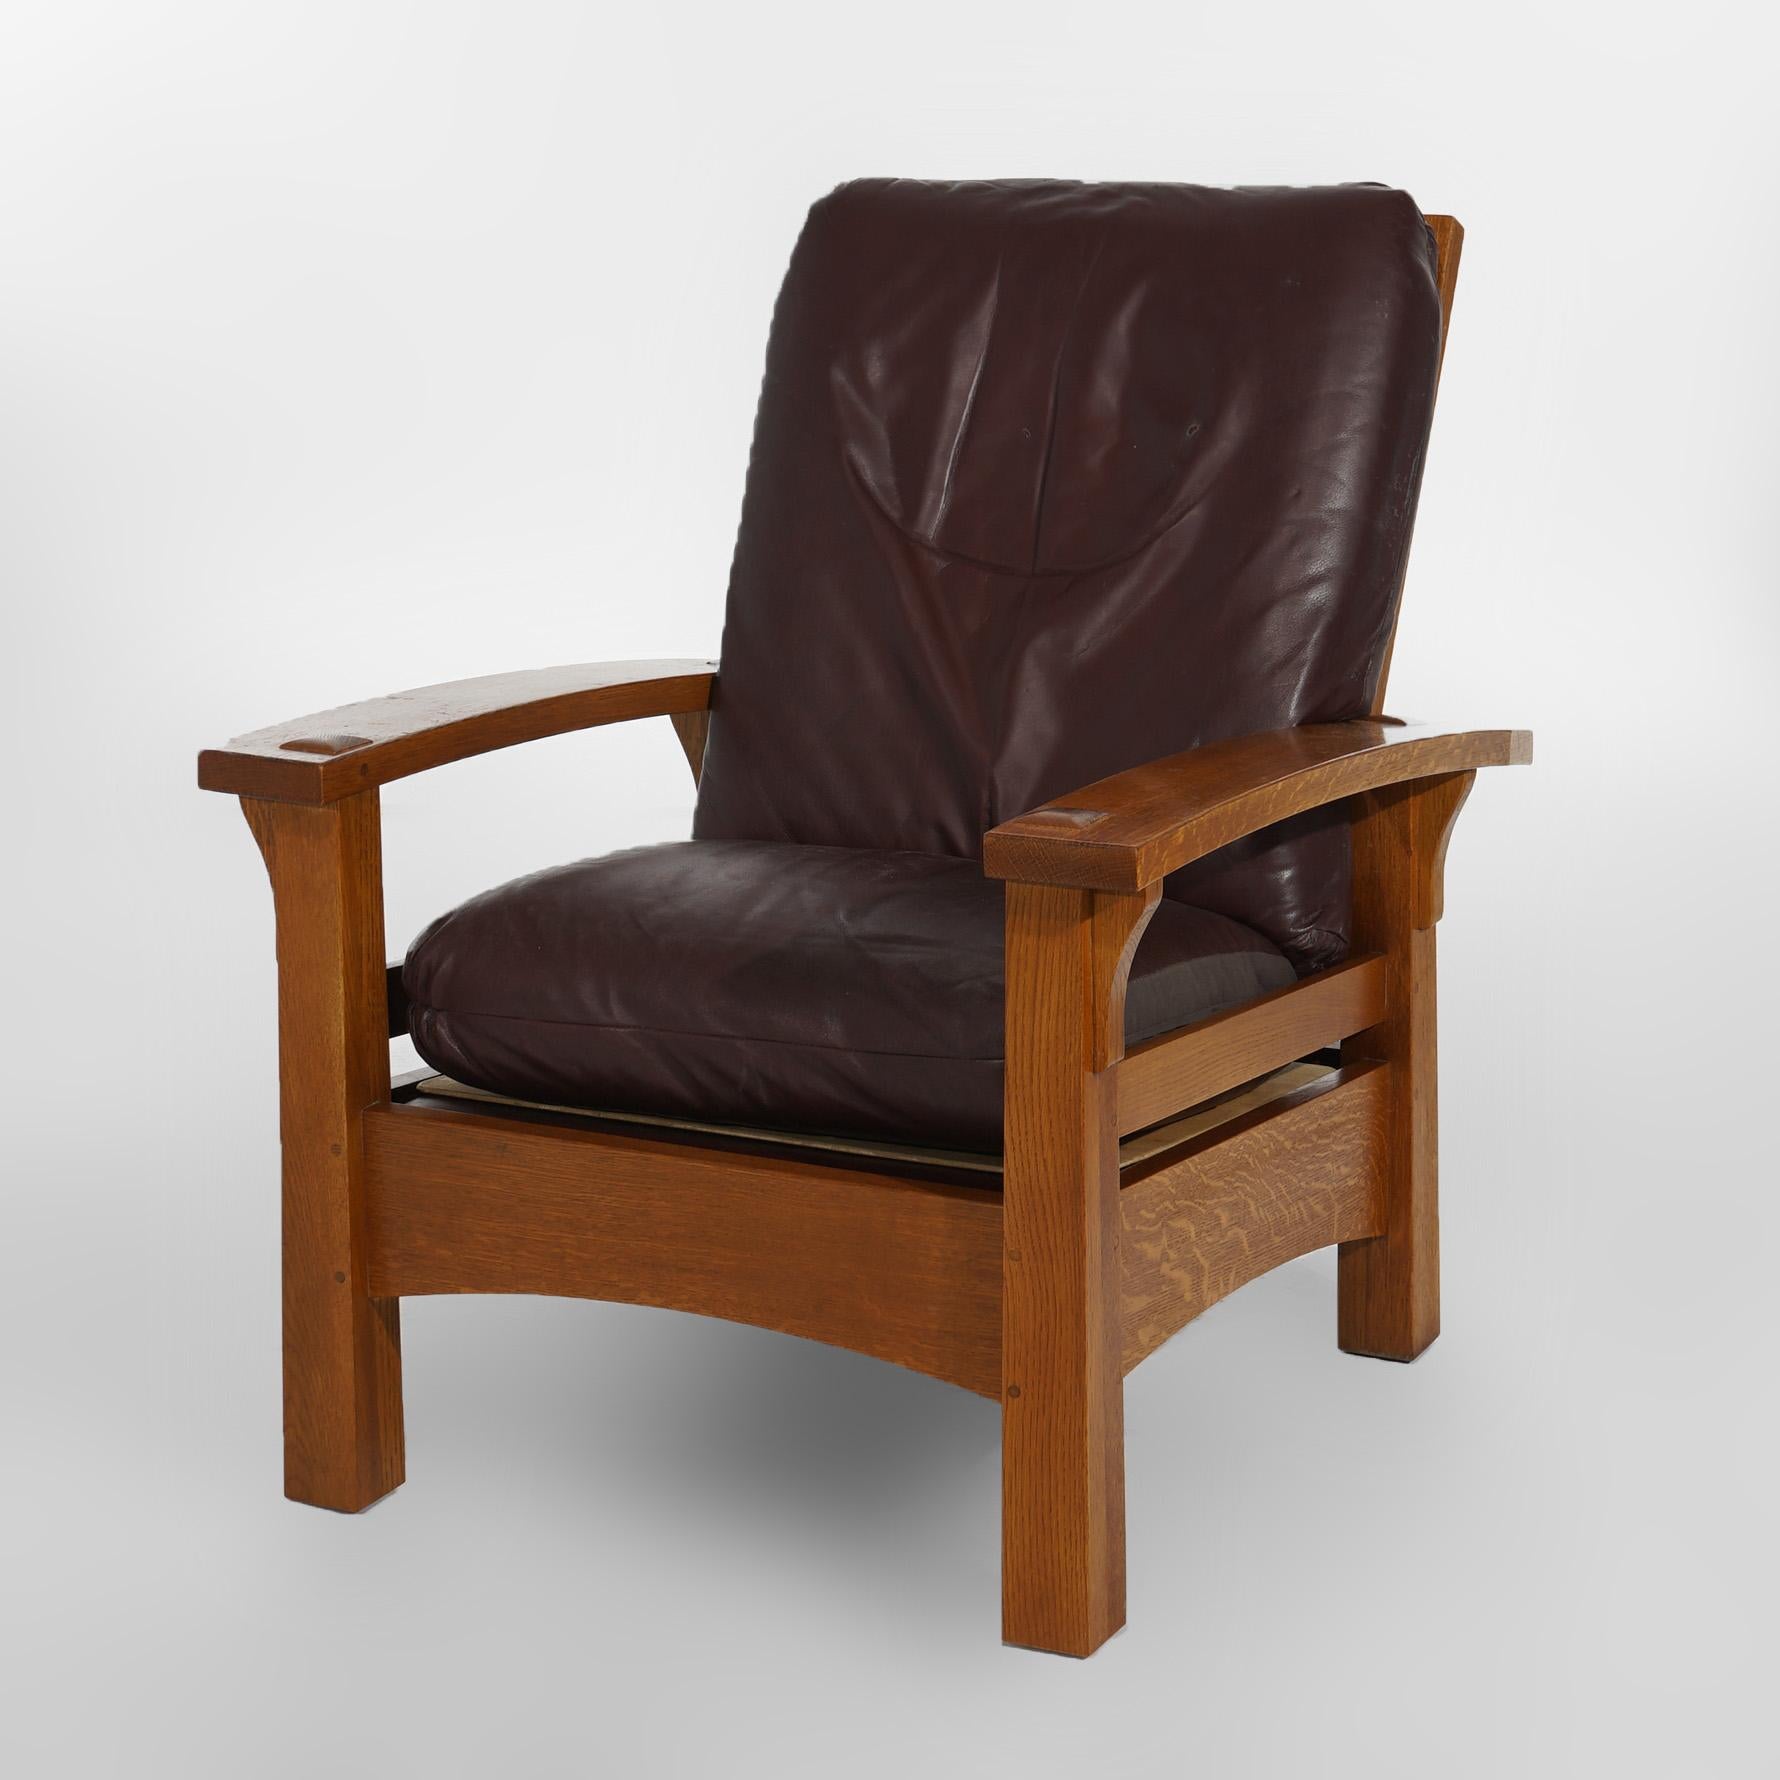 ***Ask About Discounted In-House Shipping***
An Arts and Crafts Gustav Stickley Morris style arm chair offers oak construction with slat back, bow arms, reverse tapered legs and upholstered back and seat, maker label as photographed, 20th